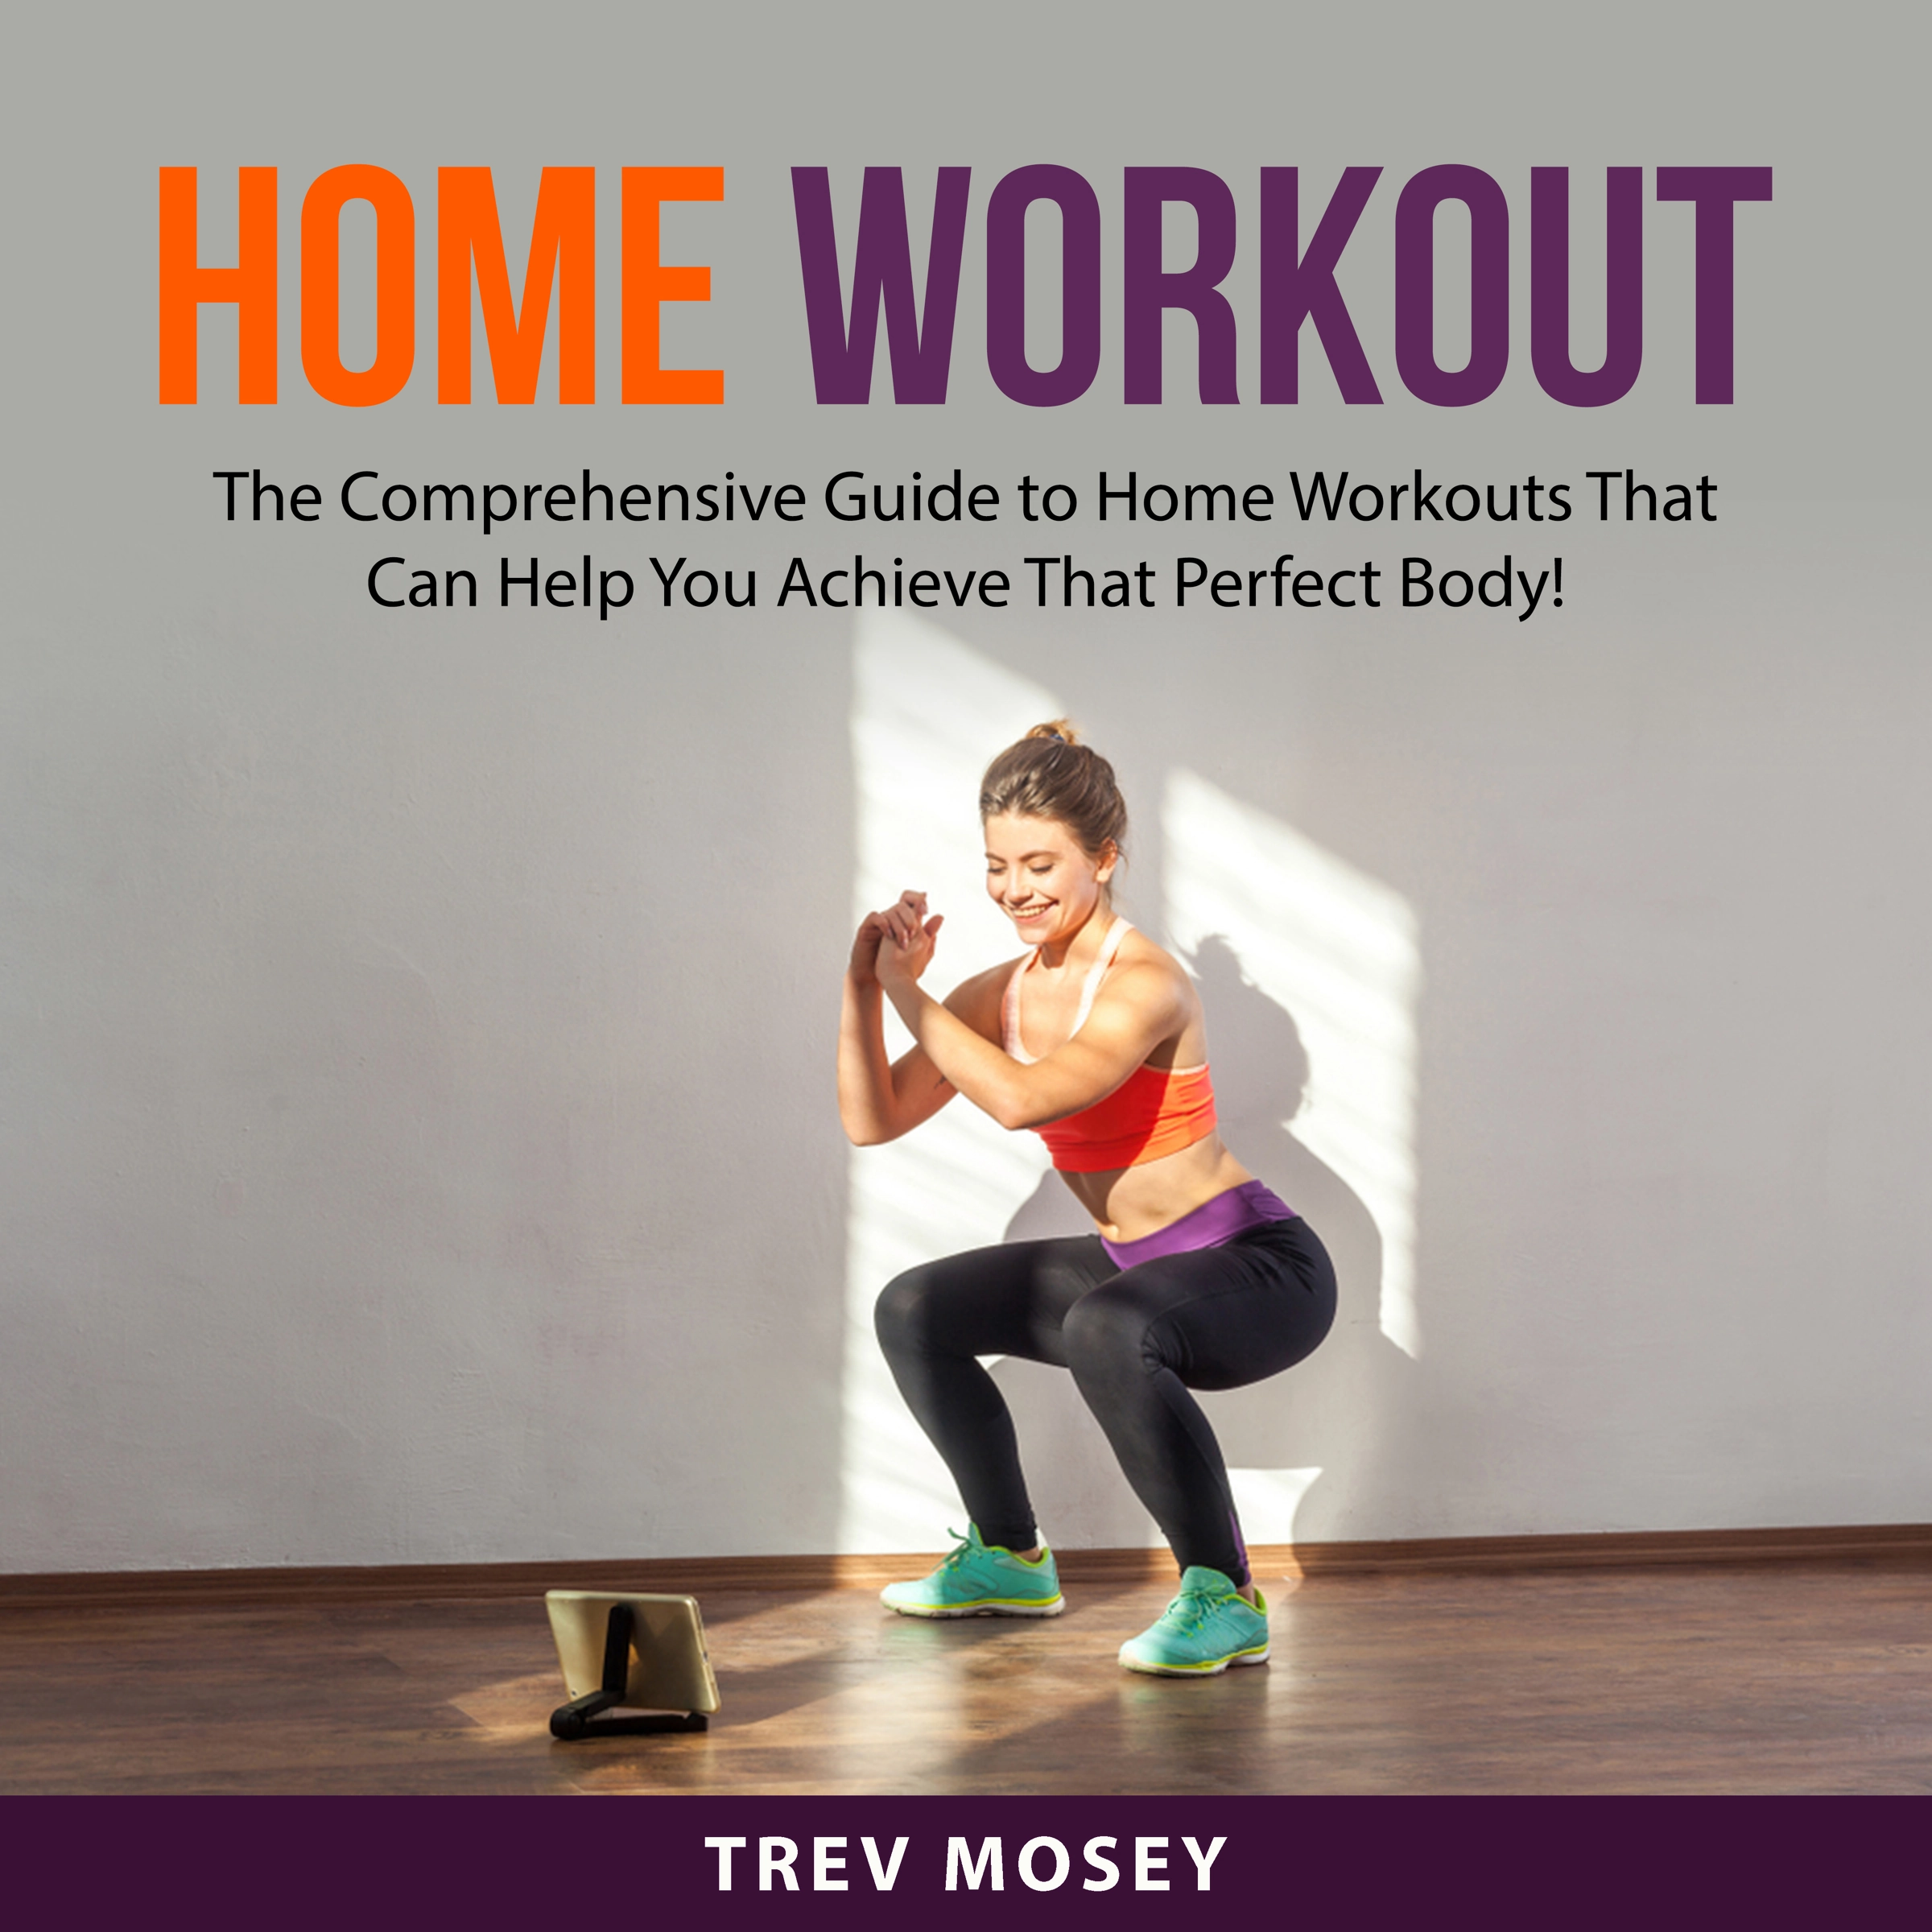 Home Workout by Trev Mosey Audiobook